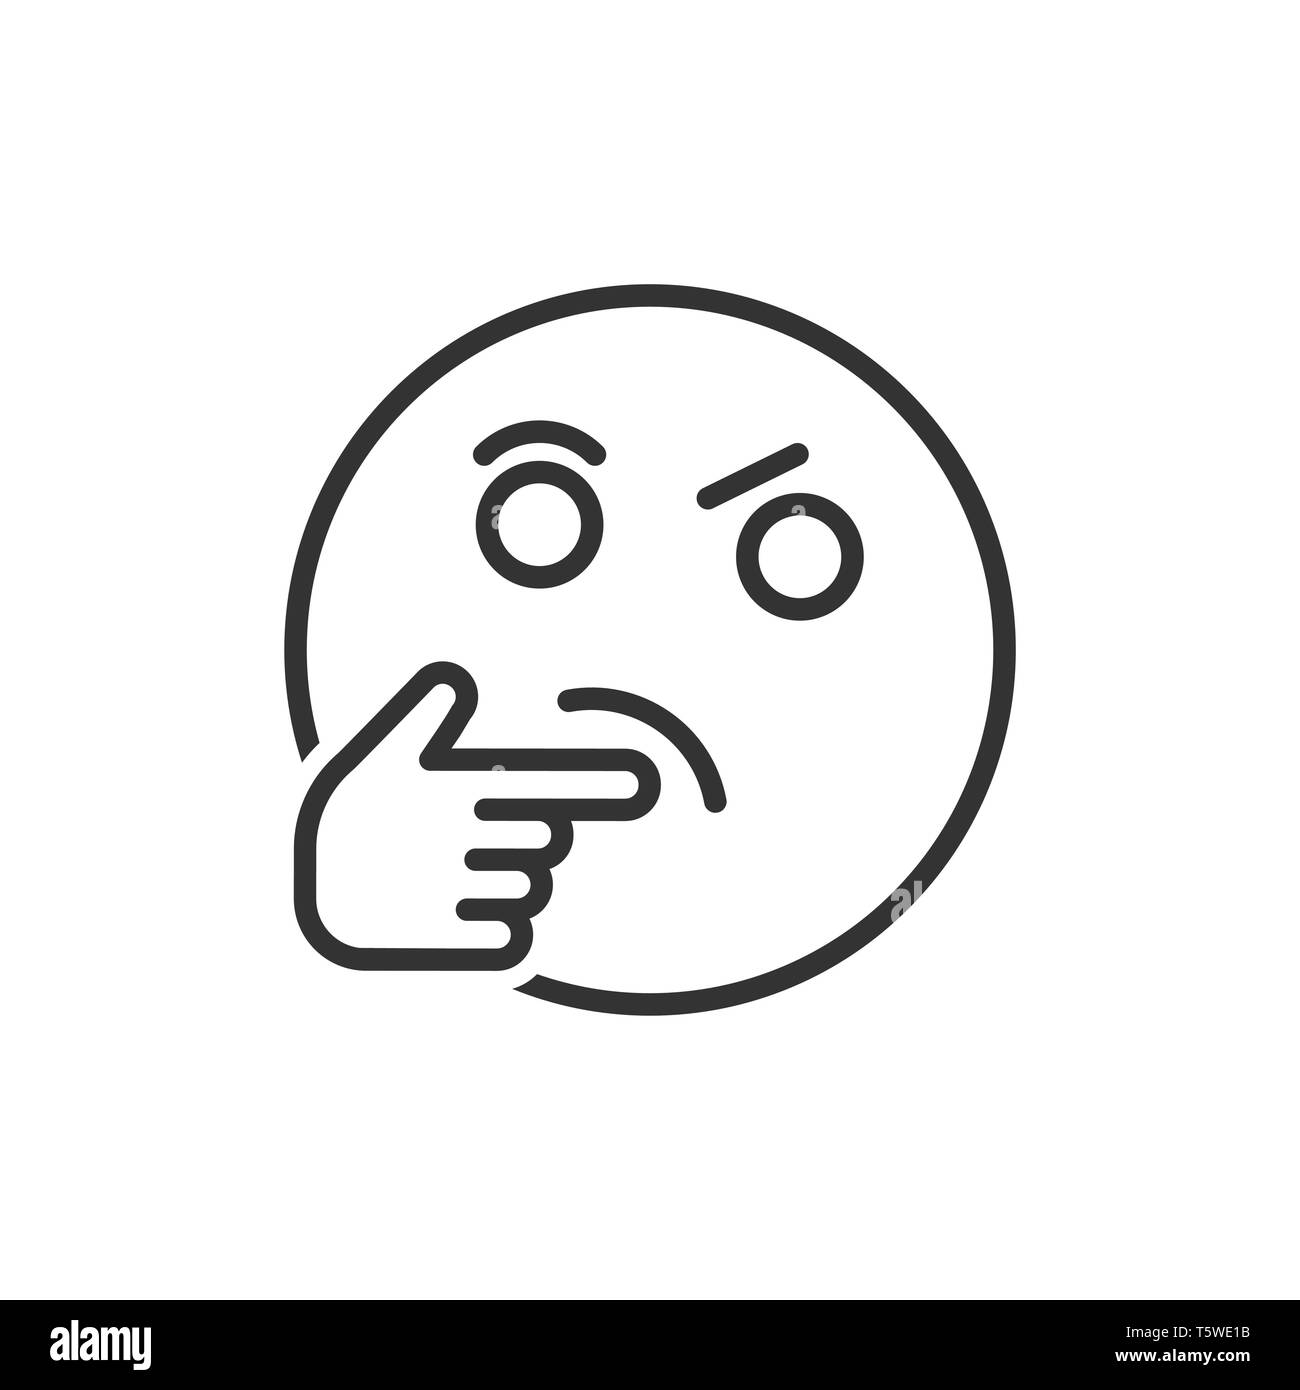 Free Confused Emoji Emoji Icon - Download in Colored Outline Style